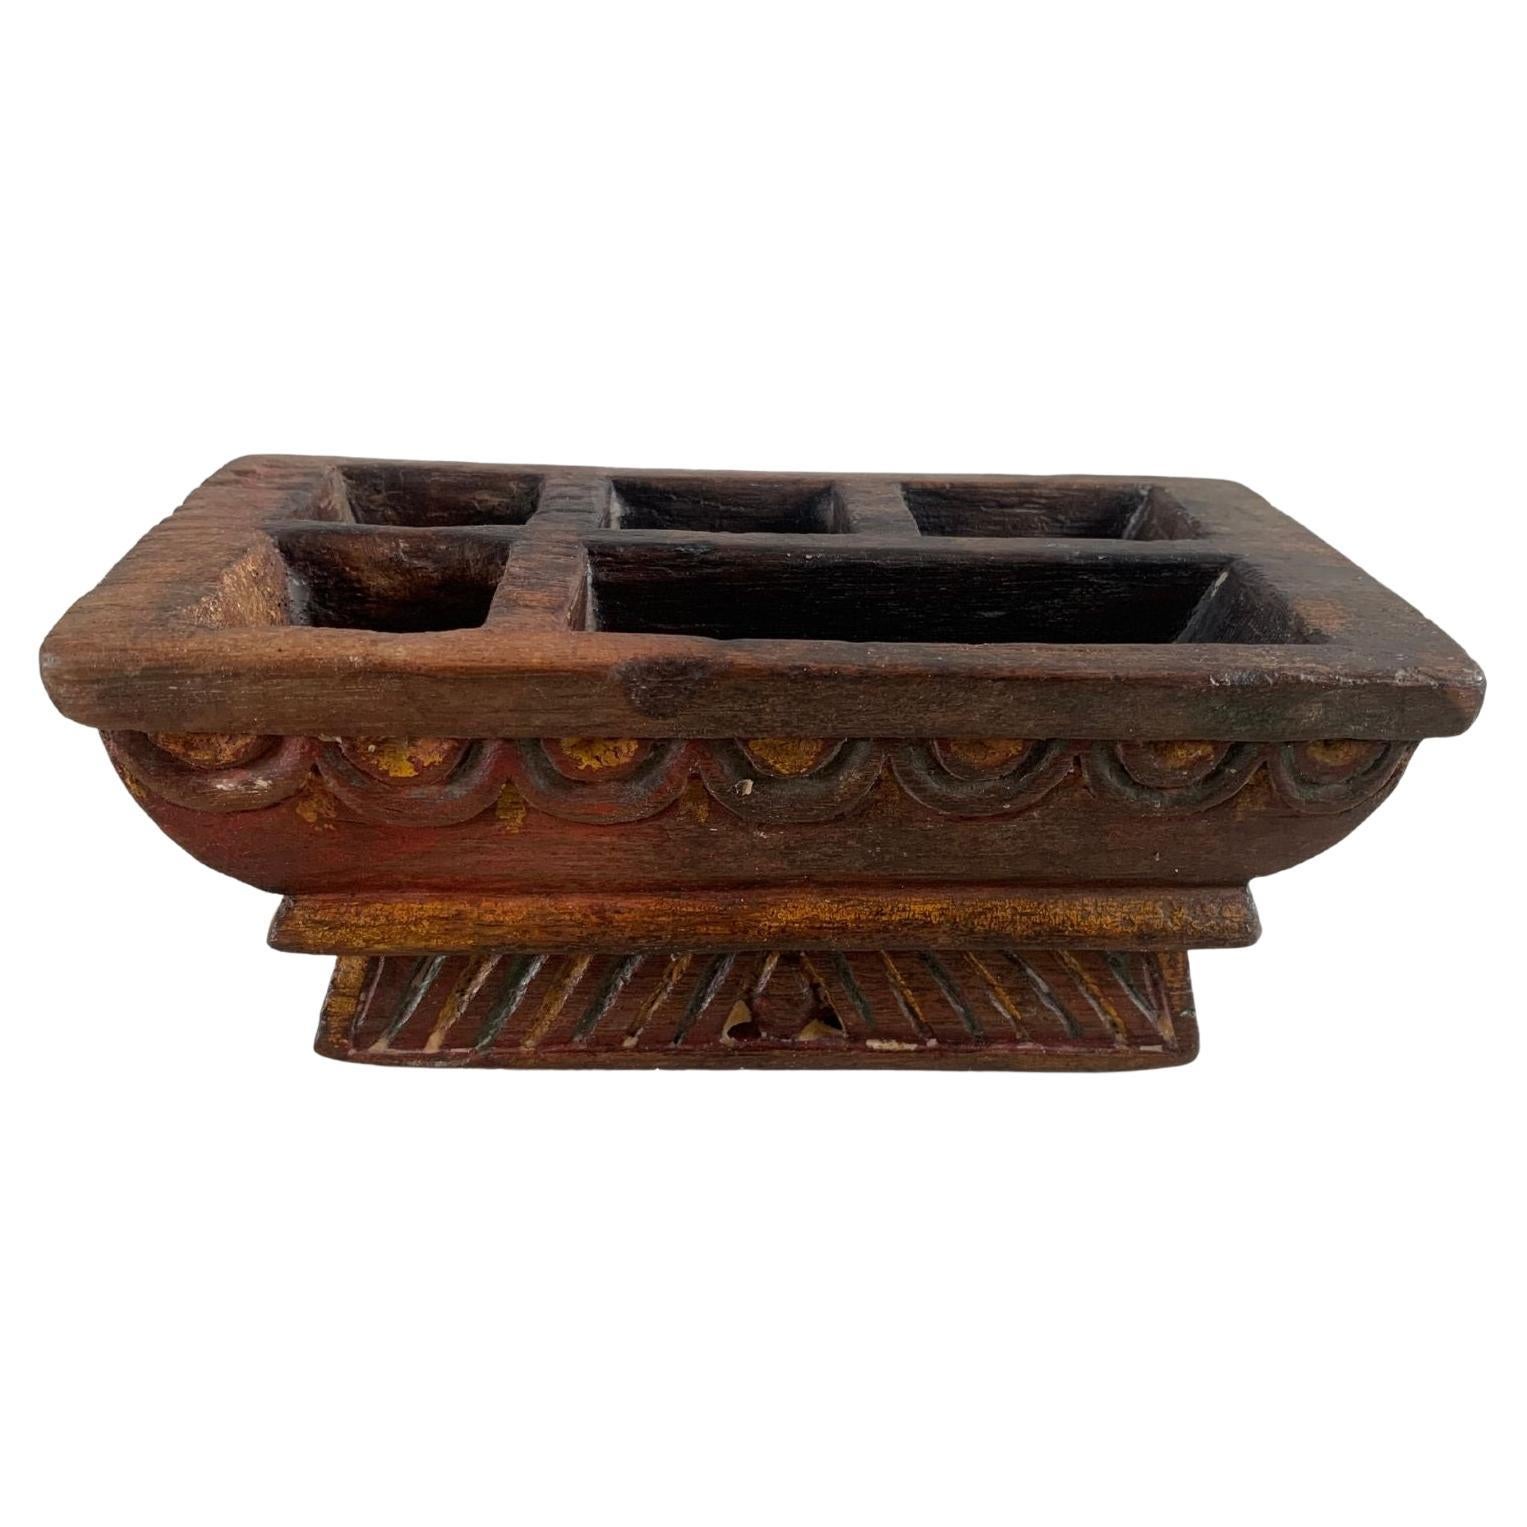 Betel Nut Box from Java with Polychromed Finish, Indonesia, c. 1900